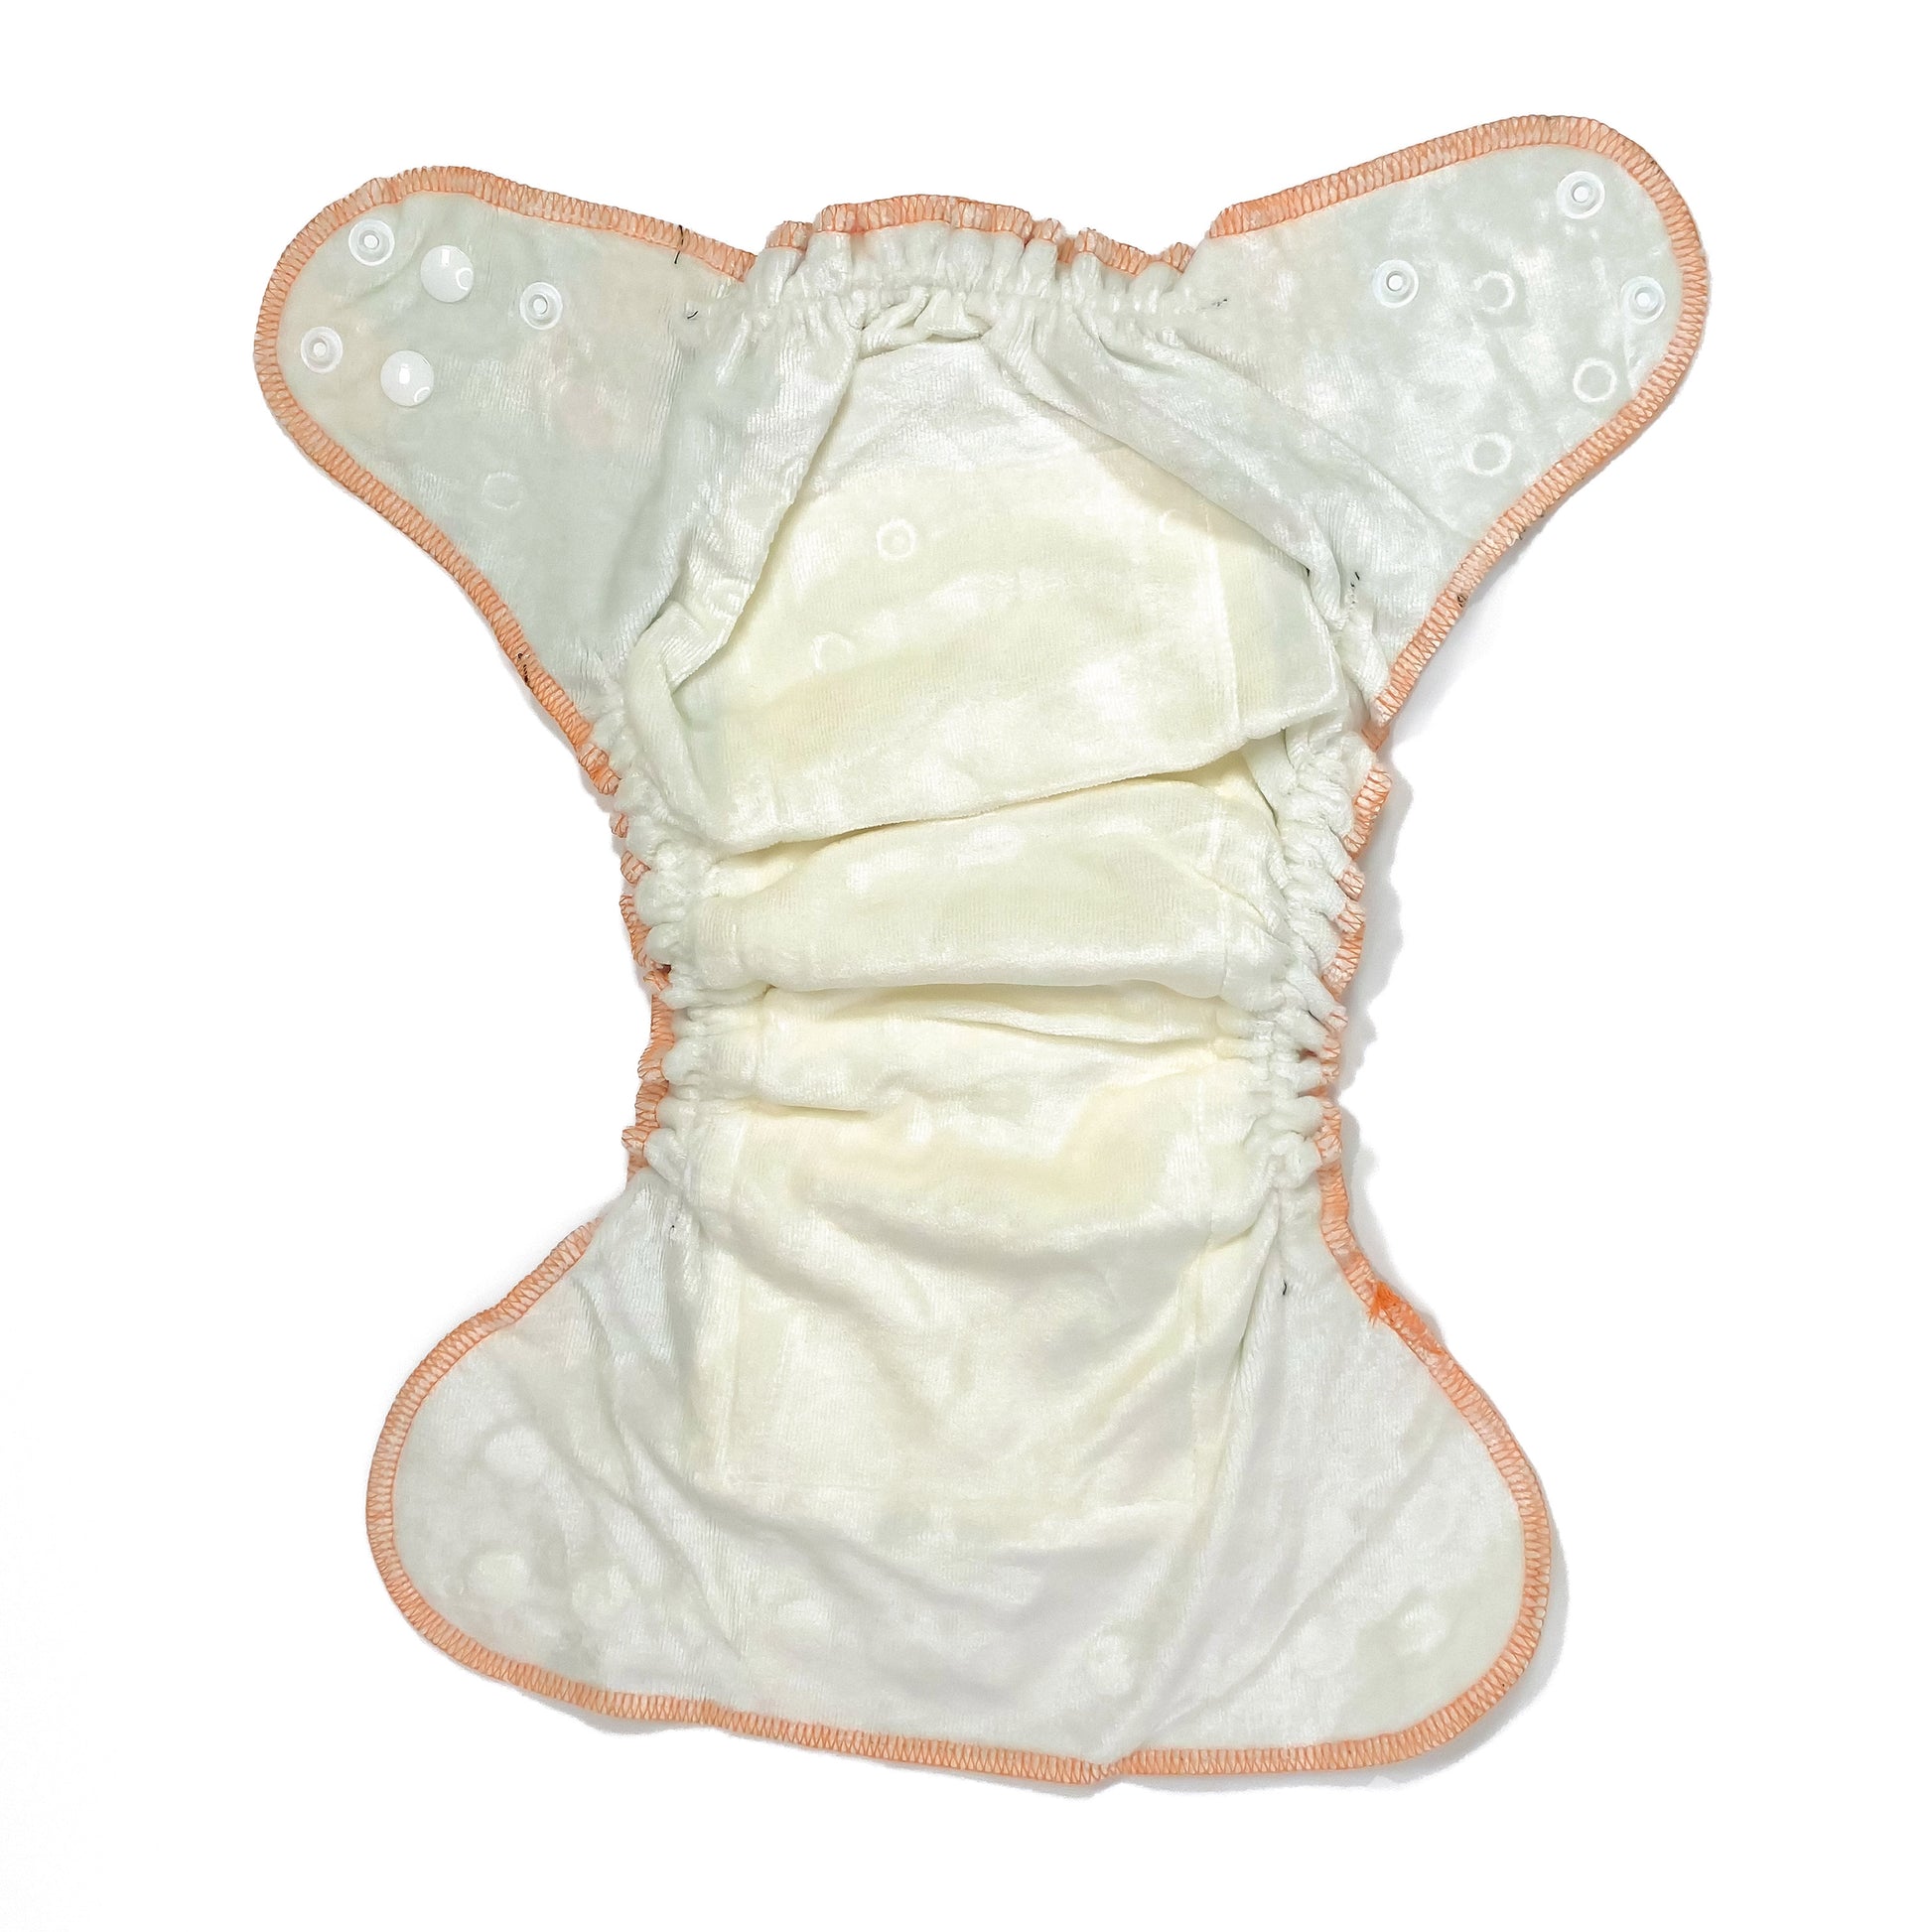 An adjustable reusable nappy for babies and toddlers, featuring a green fox design, with images of foxes on a green background. View shows the inside fabric of the nappy.